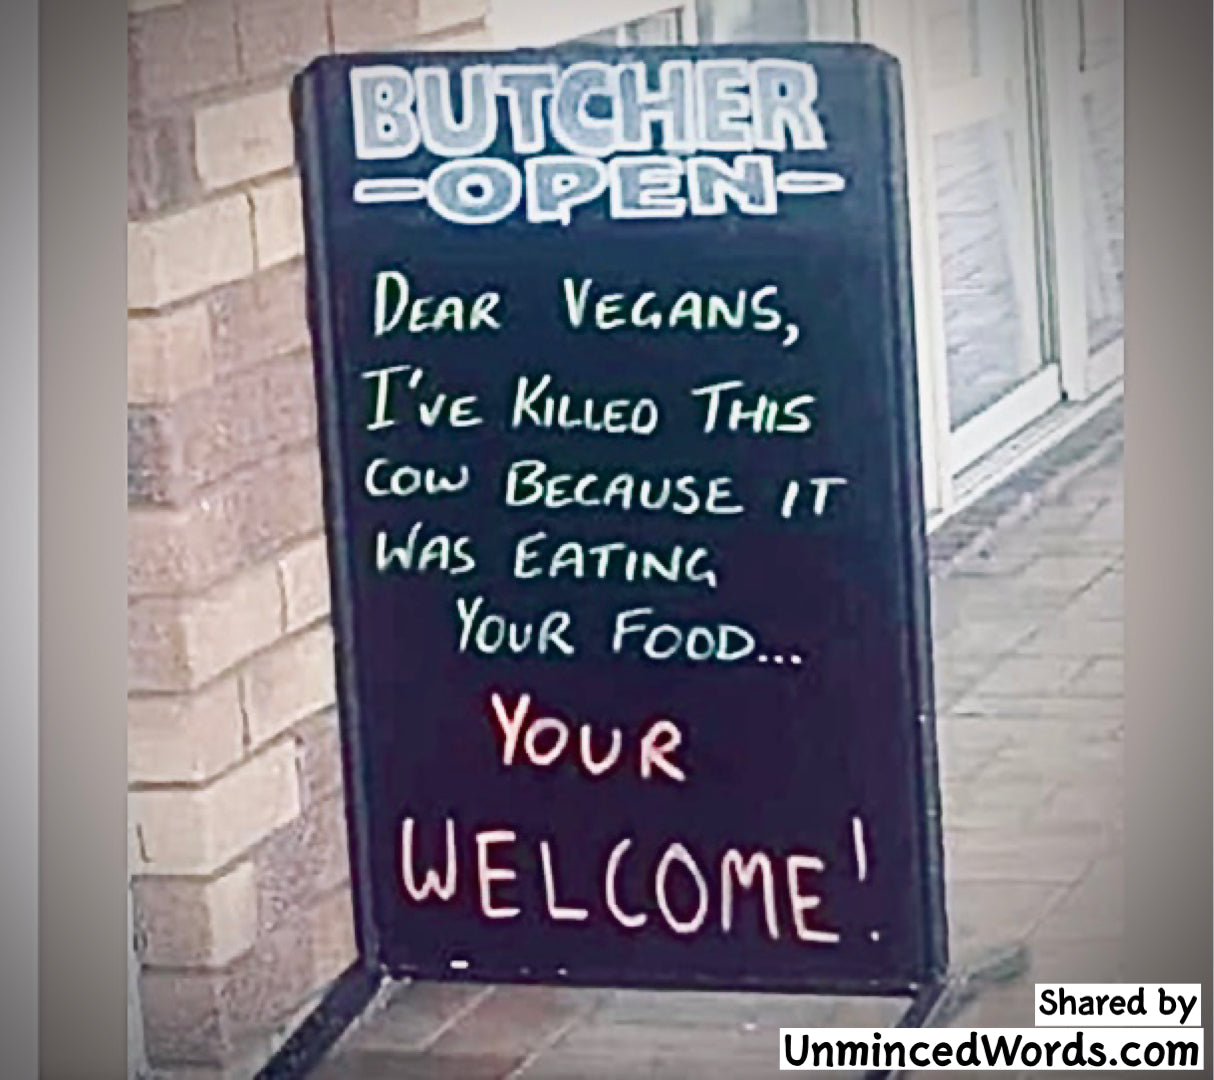 This butcher’s message to Vegans is funny truth